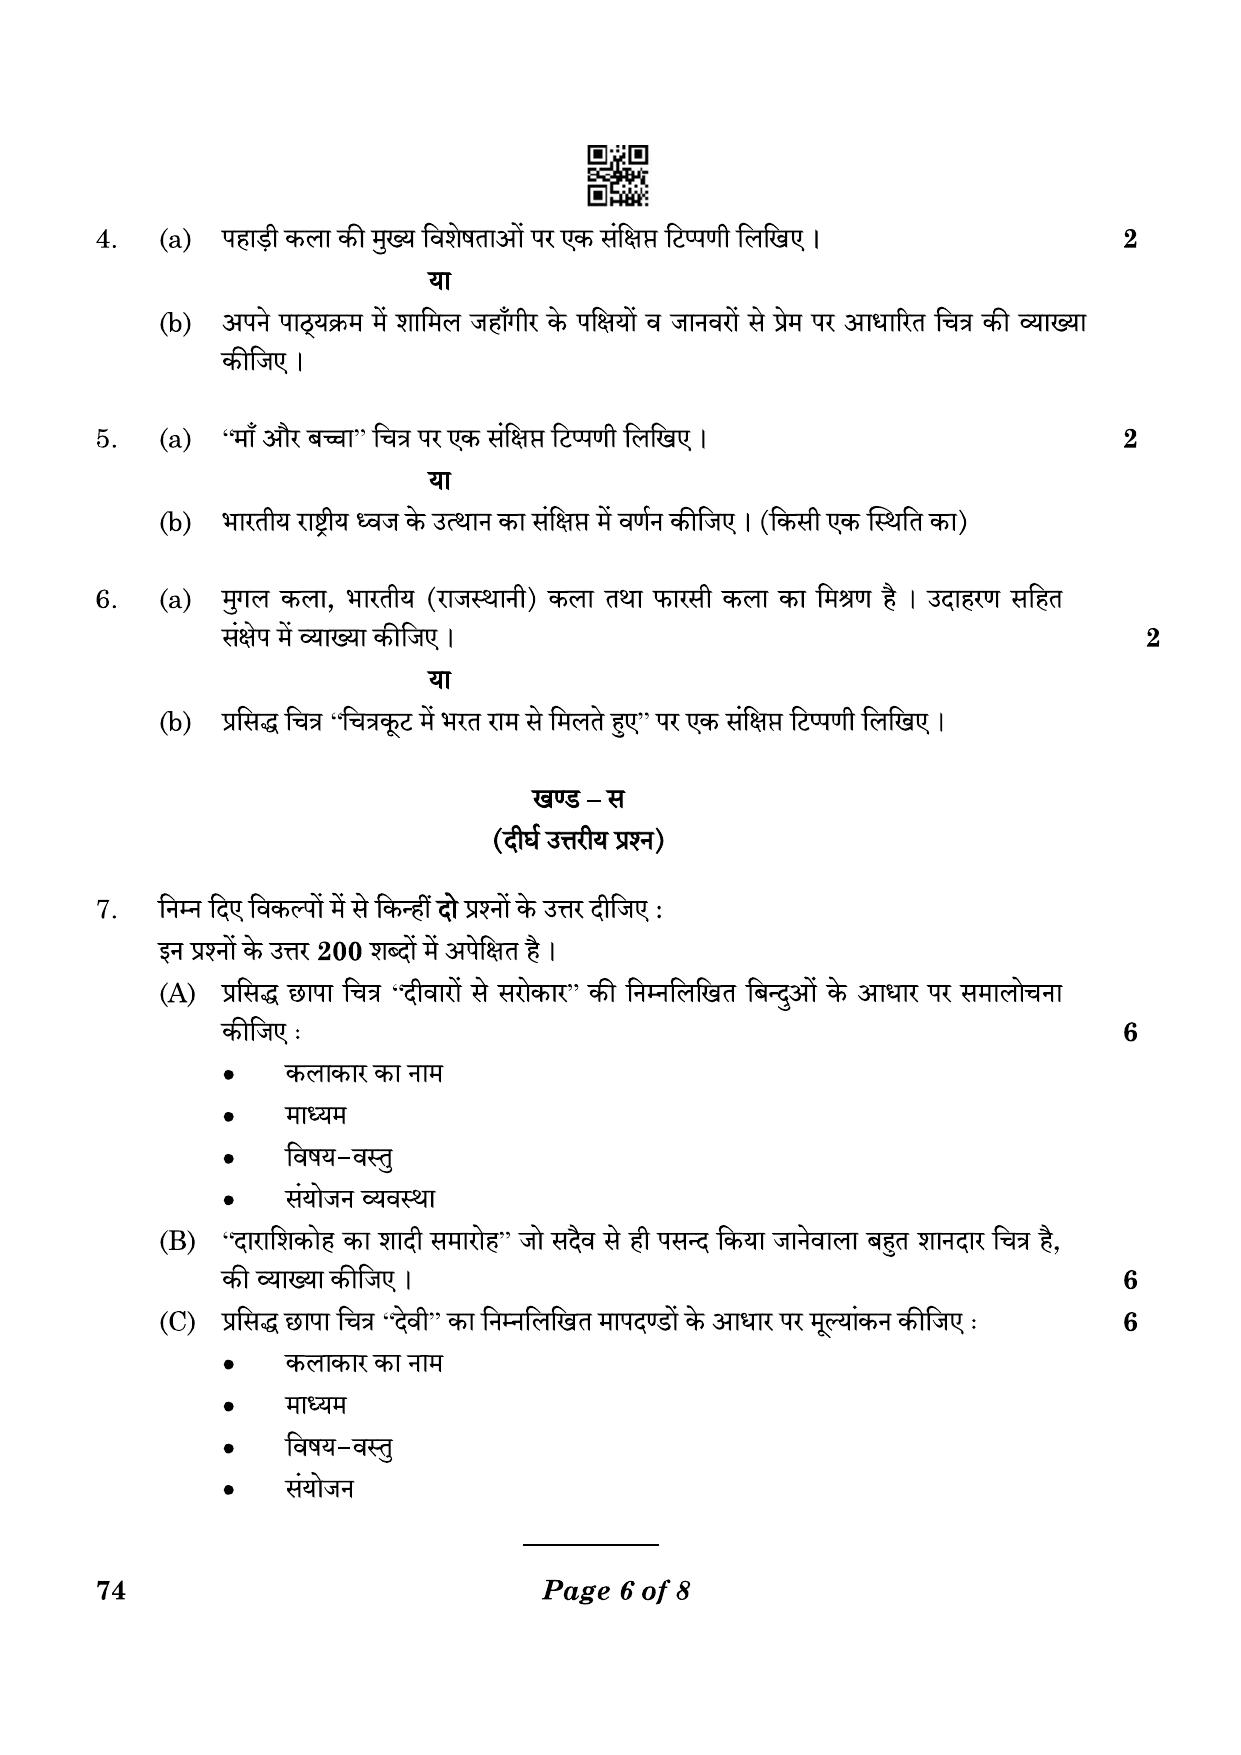 CBSE Class 12 74_Graphics 2023 Question Paper - Page 6